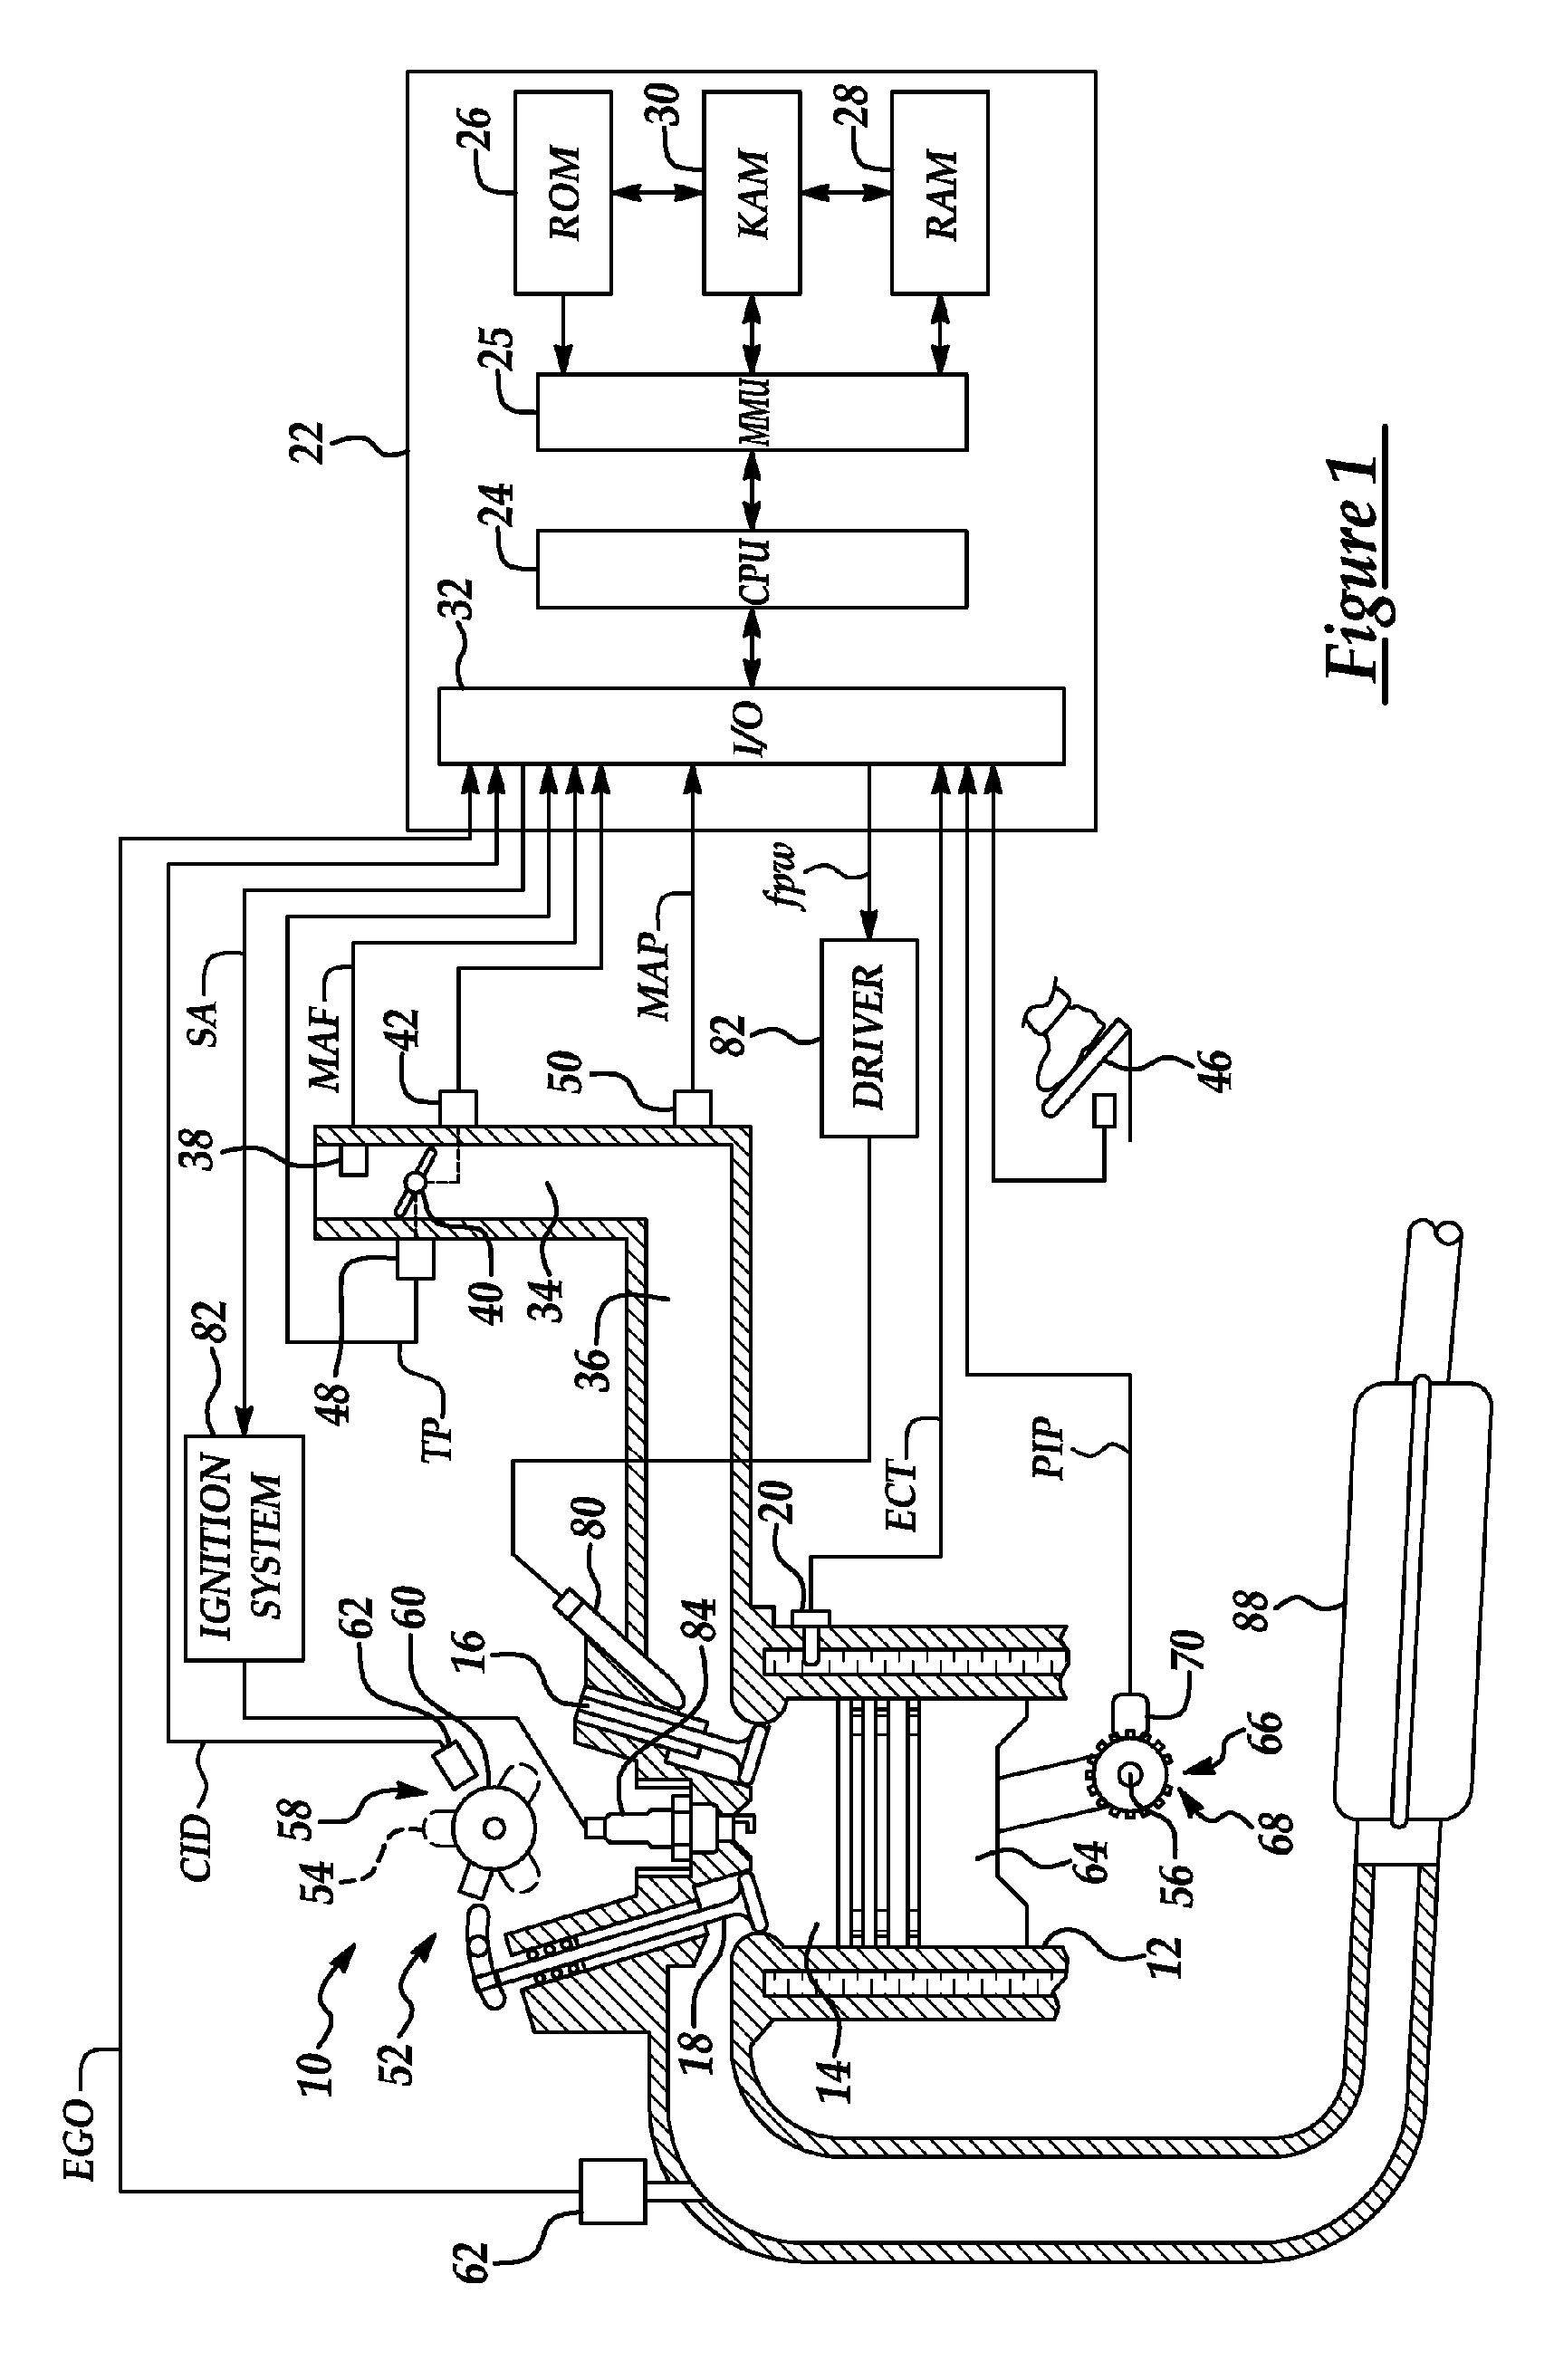 System and method for starting sequential fuel injection internal combustion engine